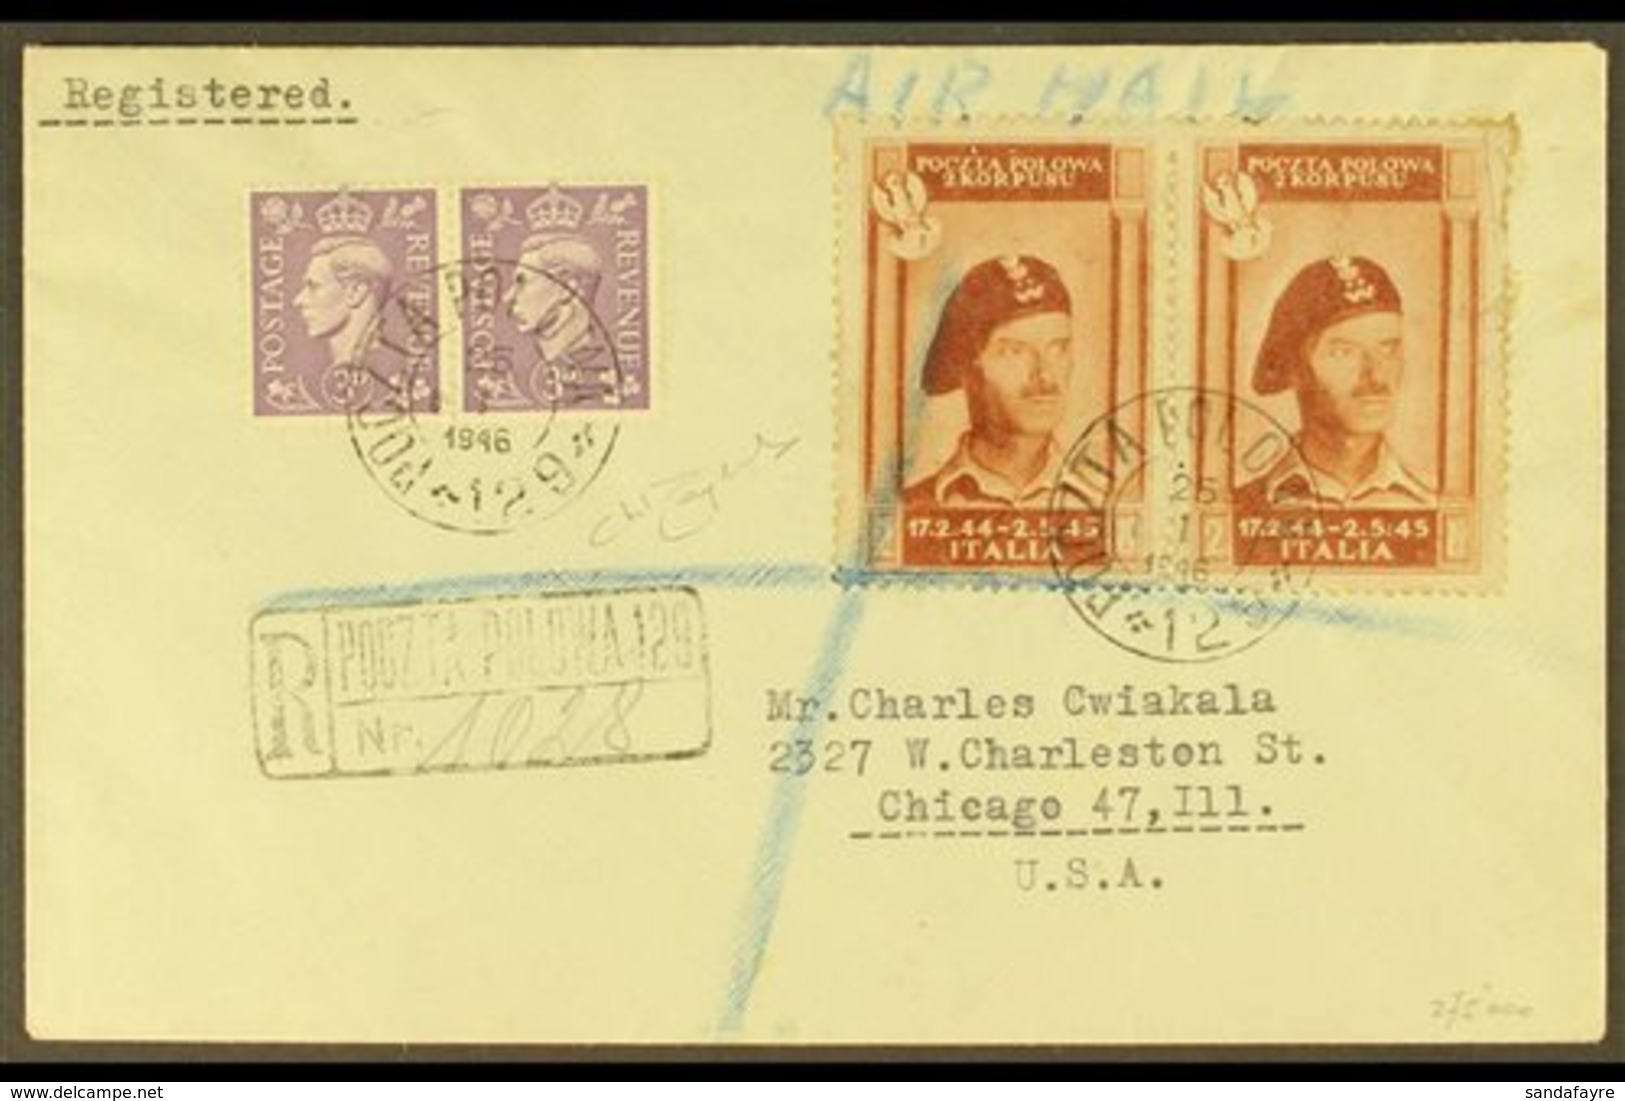 POLISH CORPS 1946 Registered Cover To Chicago Franked GB 3d Lilac Plus Polish Corps 2z Red Brown Pair, Sass 4, With Pozt - Unclassified